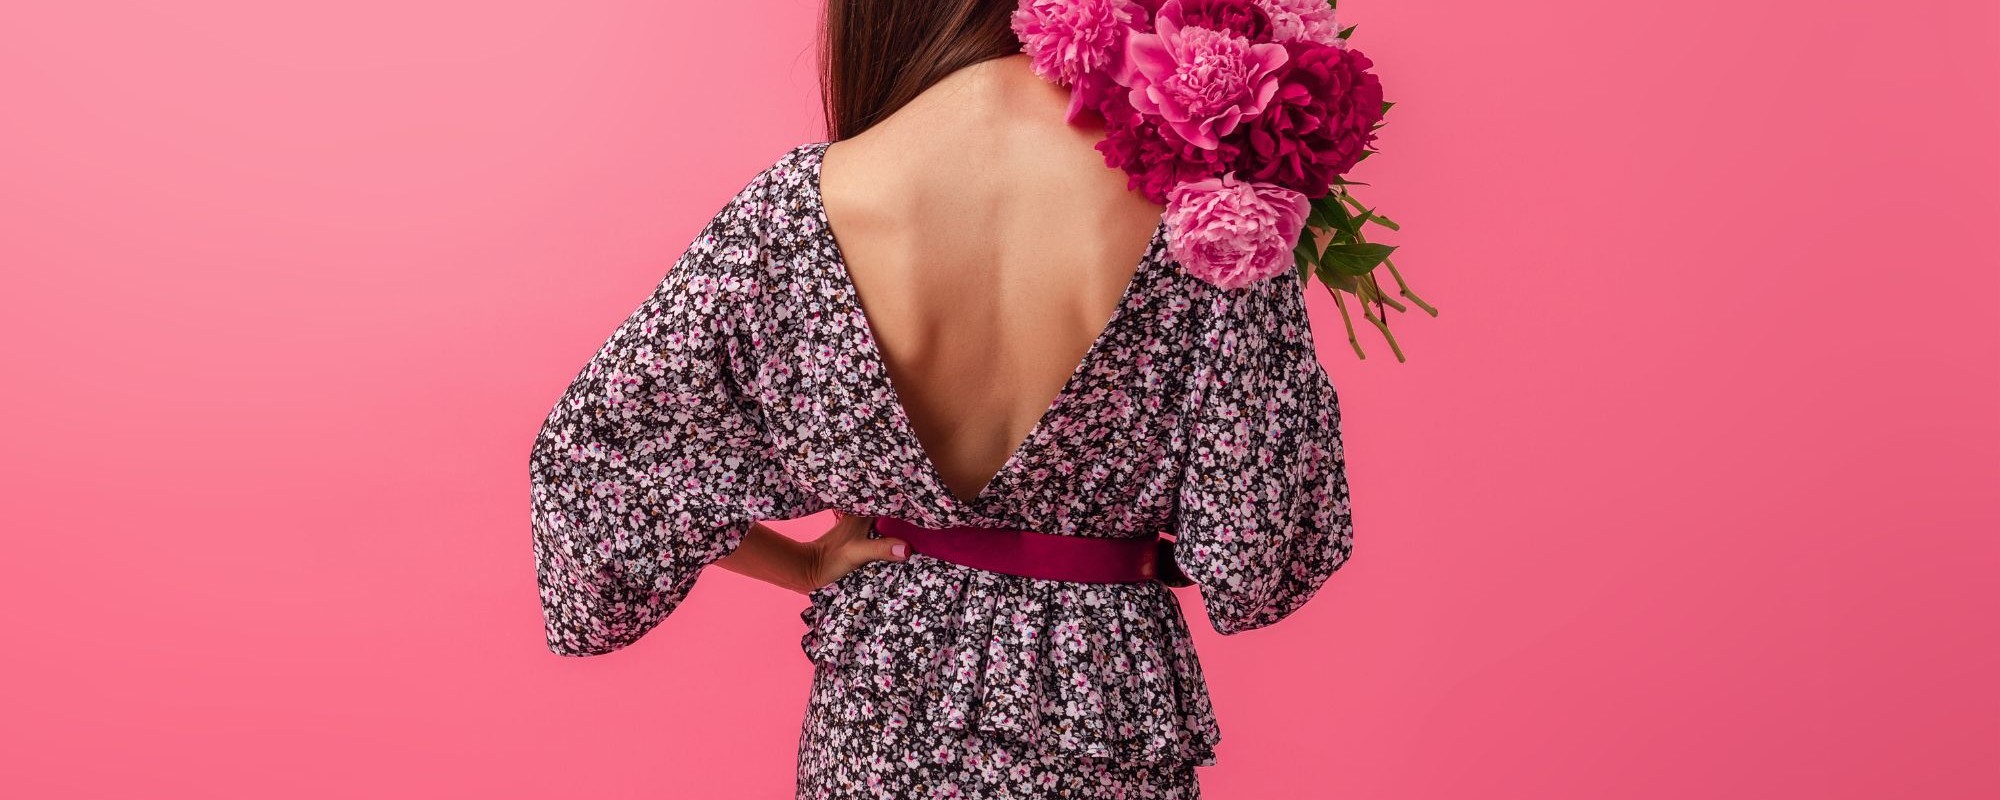 stylish-woman-pink-summer-trendy-dress-posing-with-peony-flowers-bouquet-view-from-back